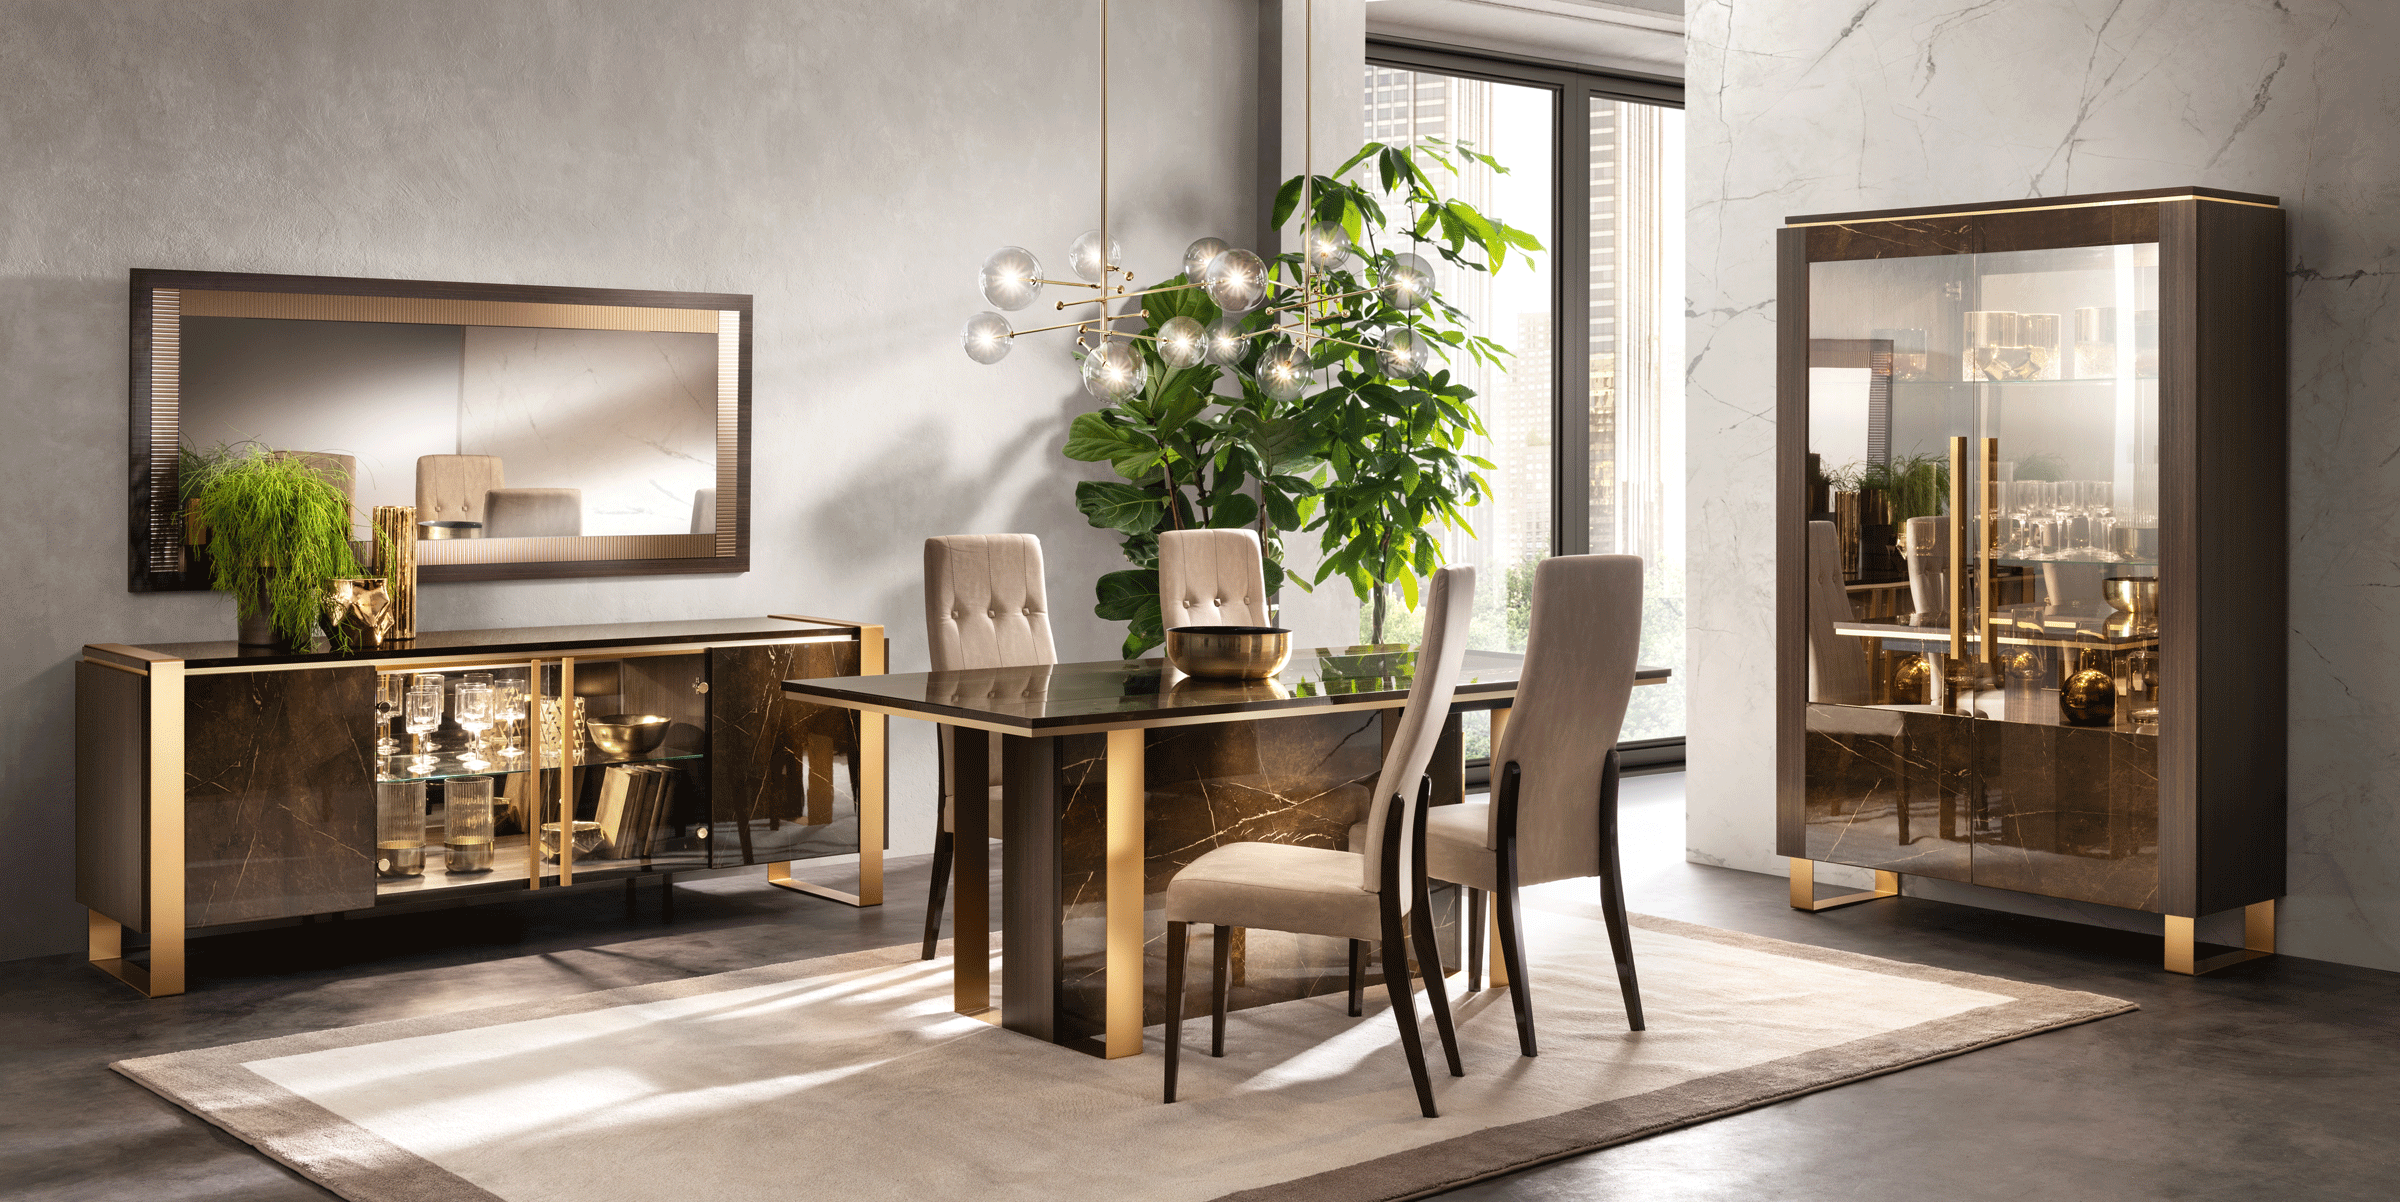 Dining Room Furniture Chairs Essenza Dining by Arredoclassic, Italy Additional